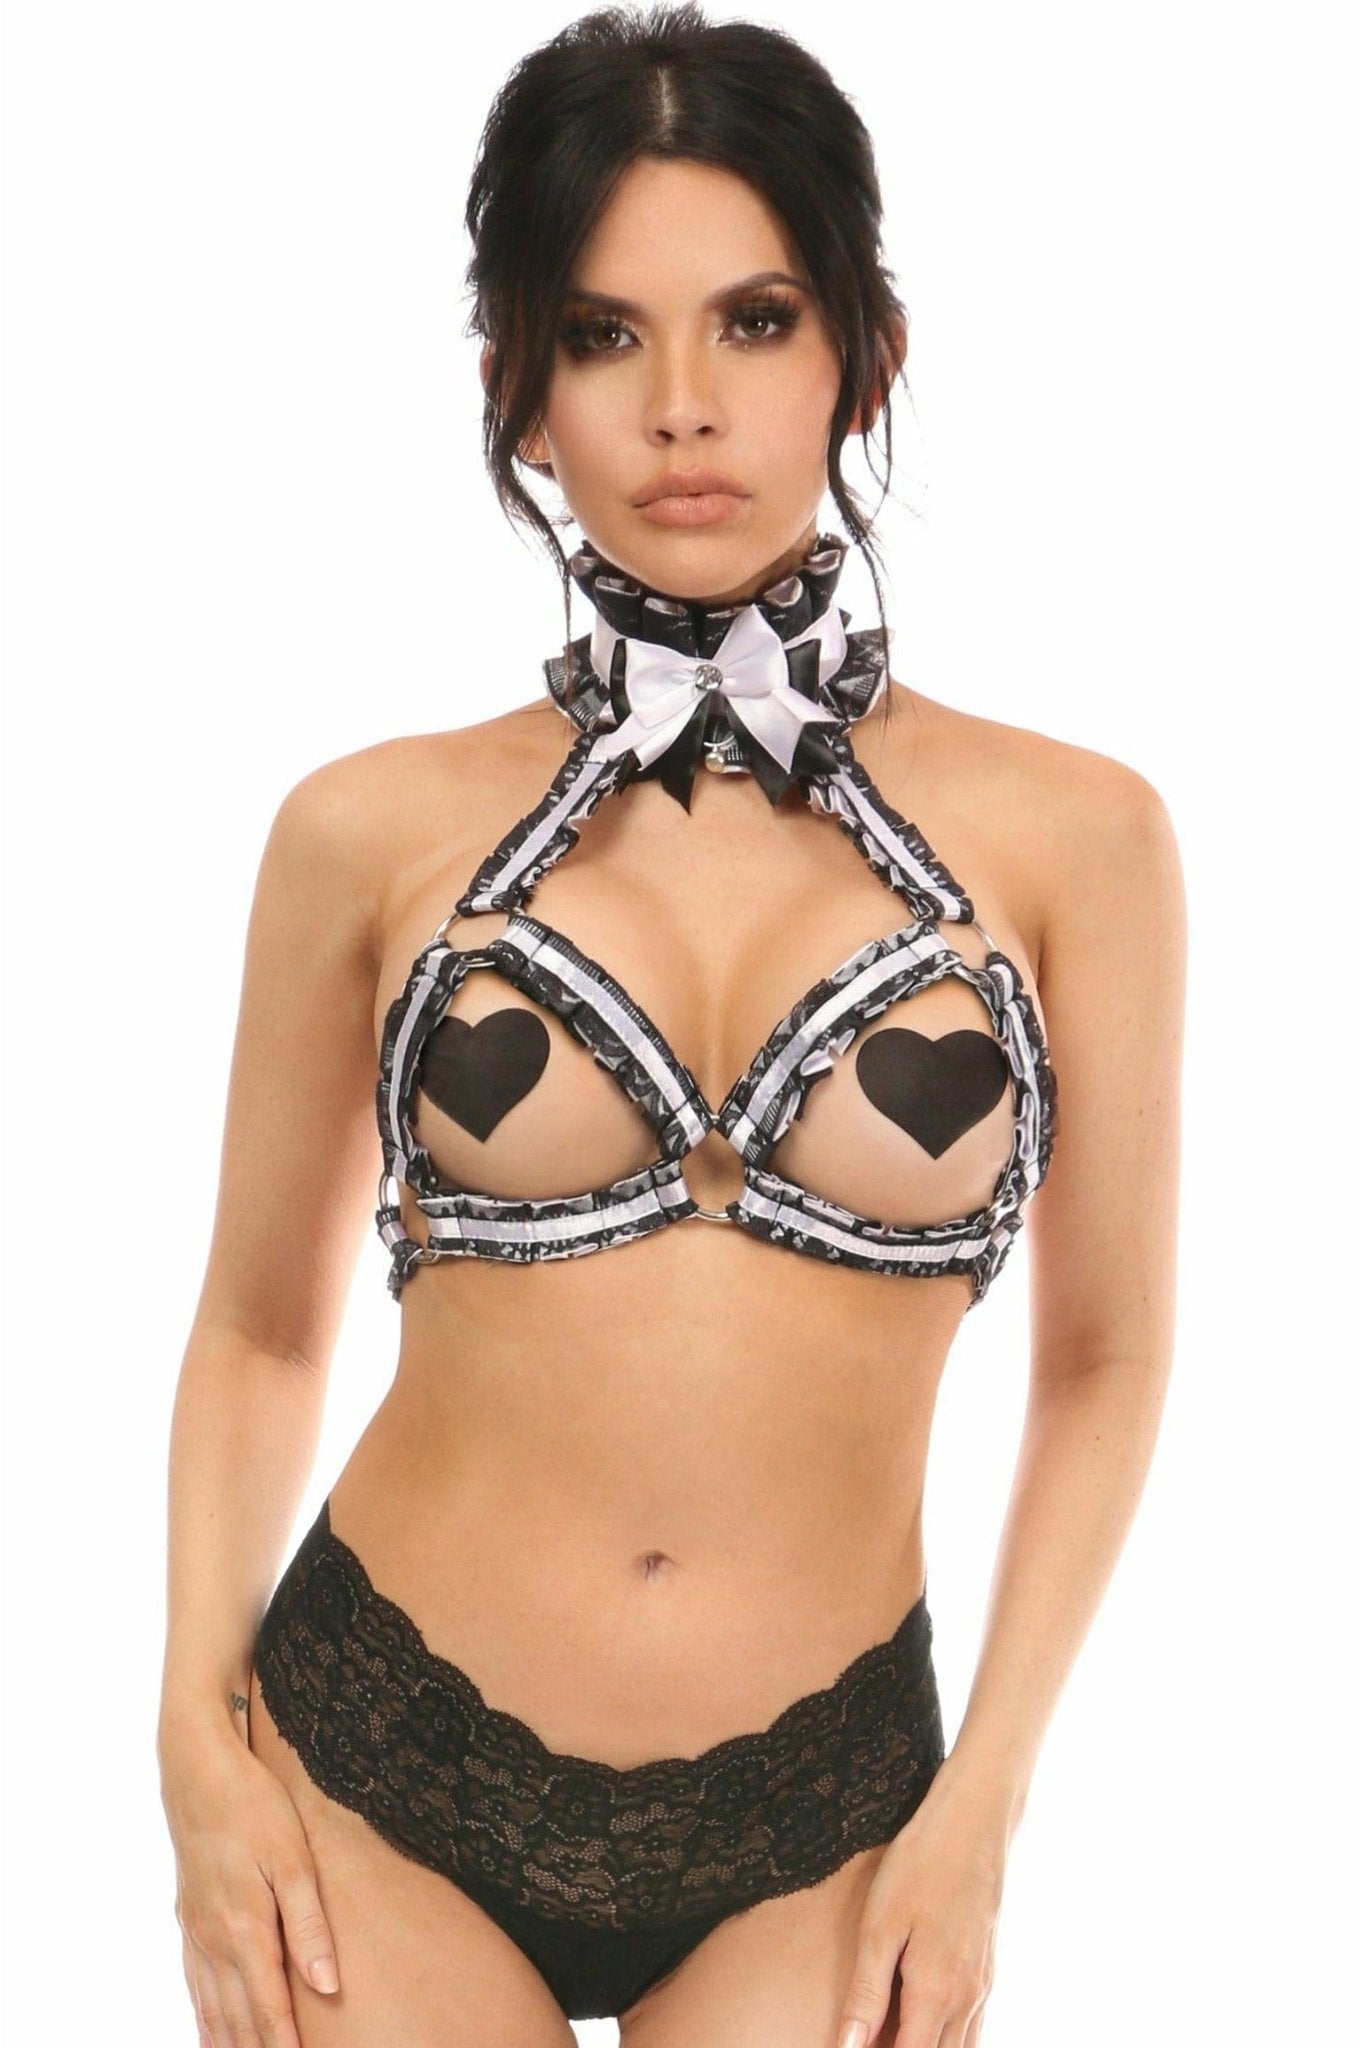 Sexy White with Black Lace Bra Top Body Harness Musotica.com